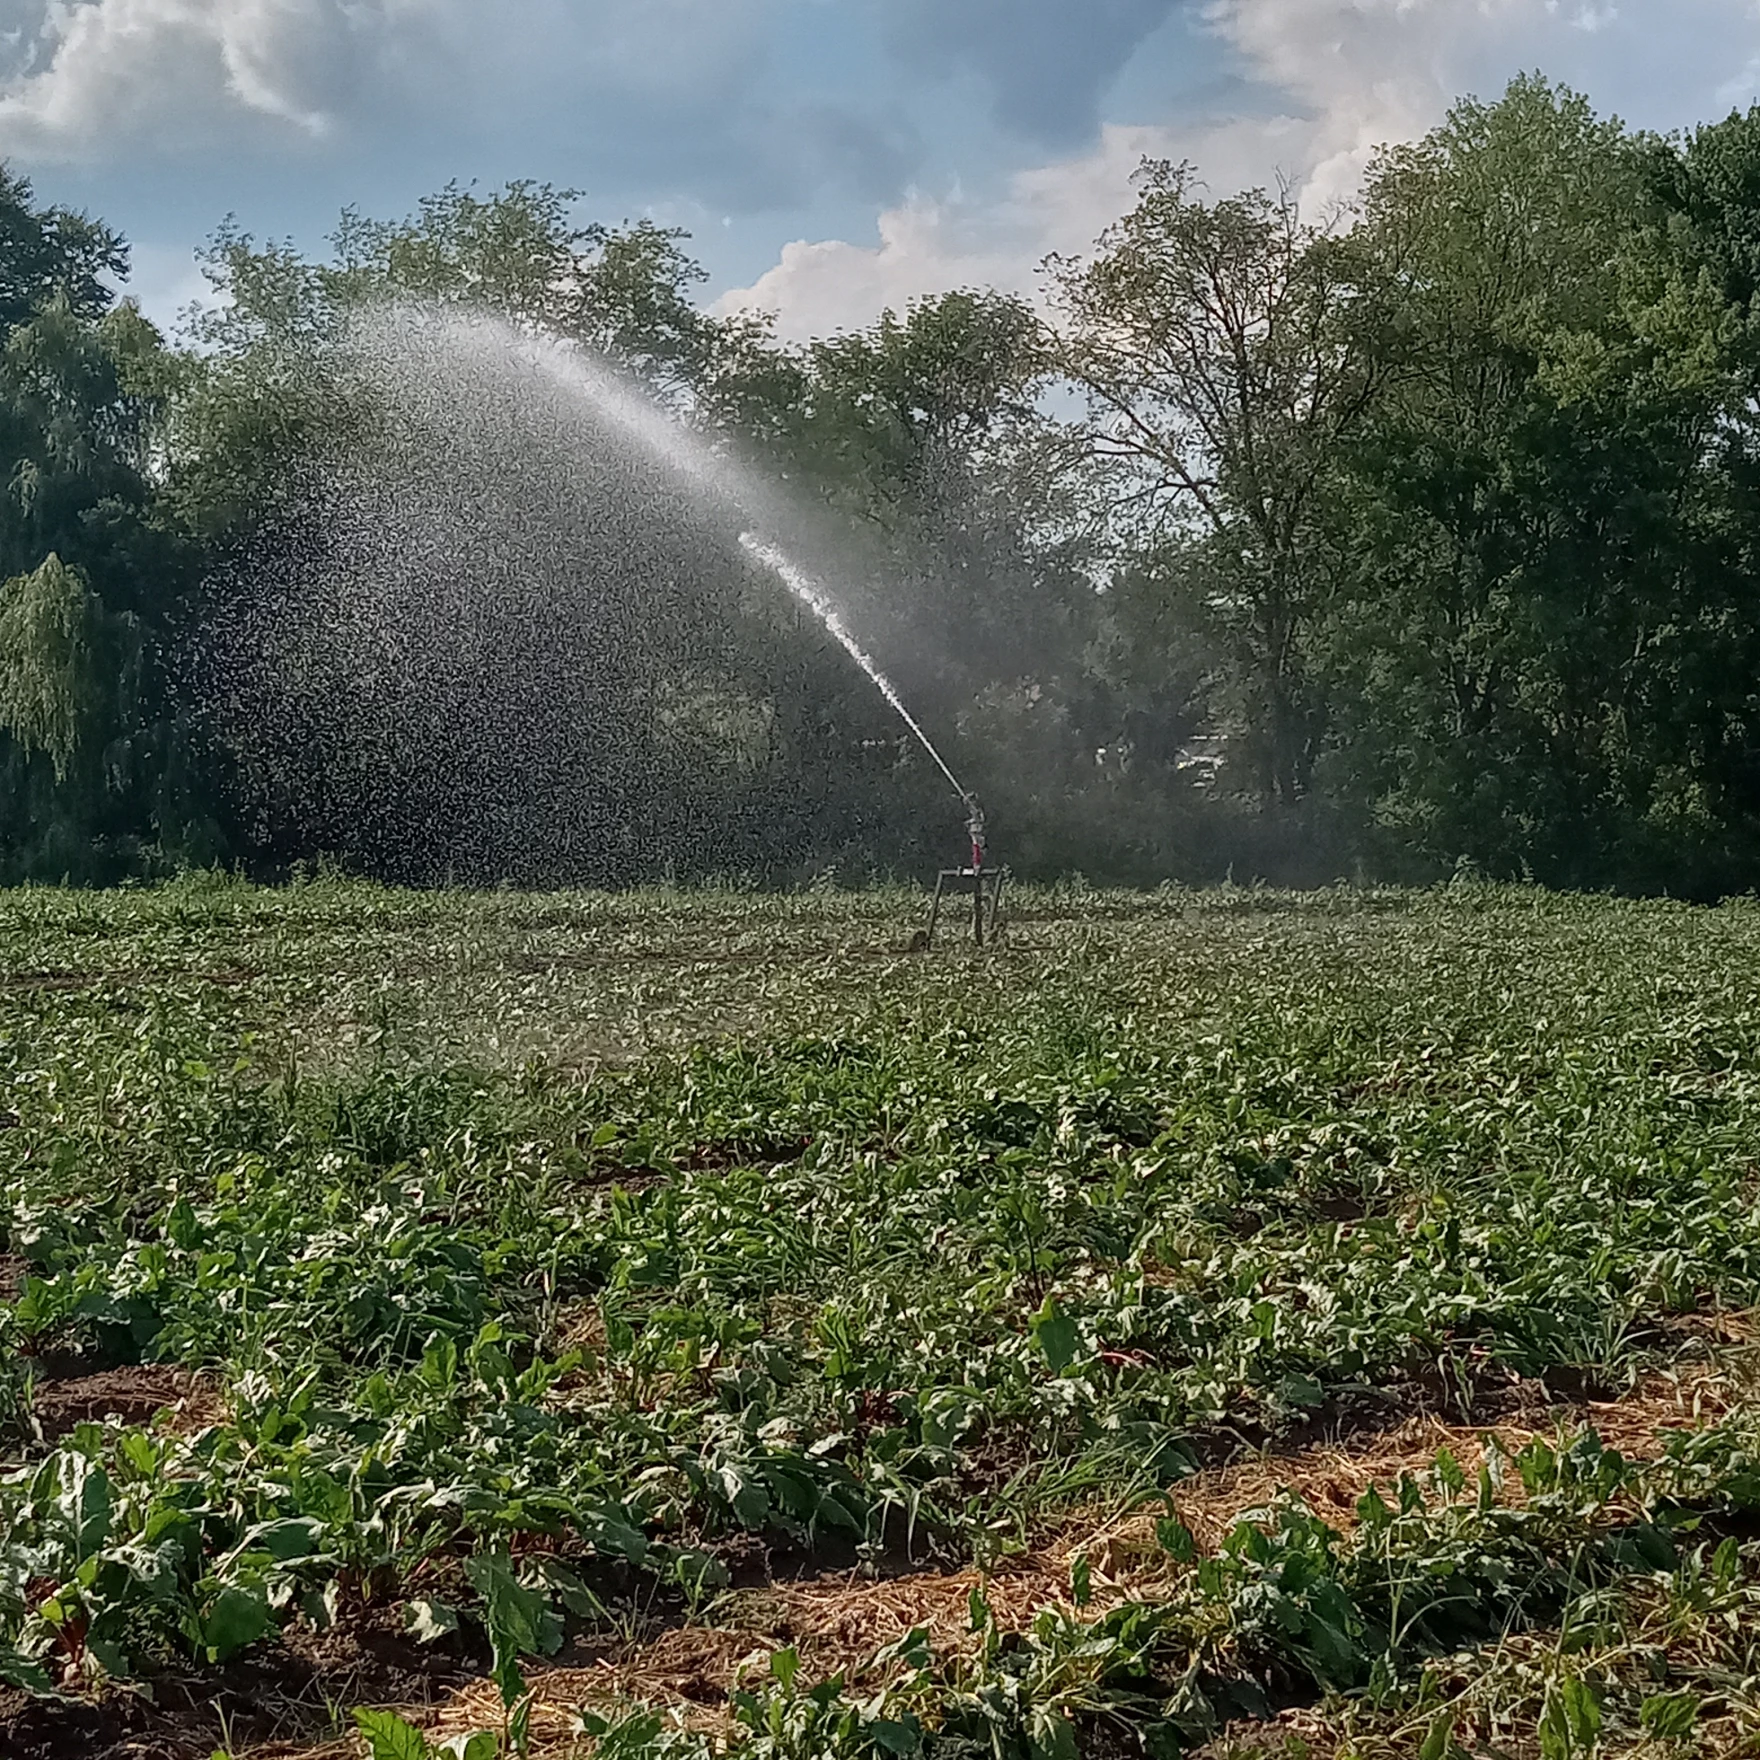 Field irrigation at Red Fire Farm in Granby, Massachusetts.